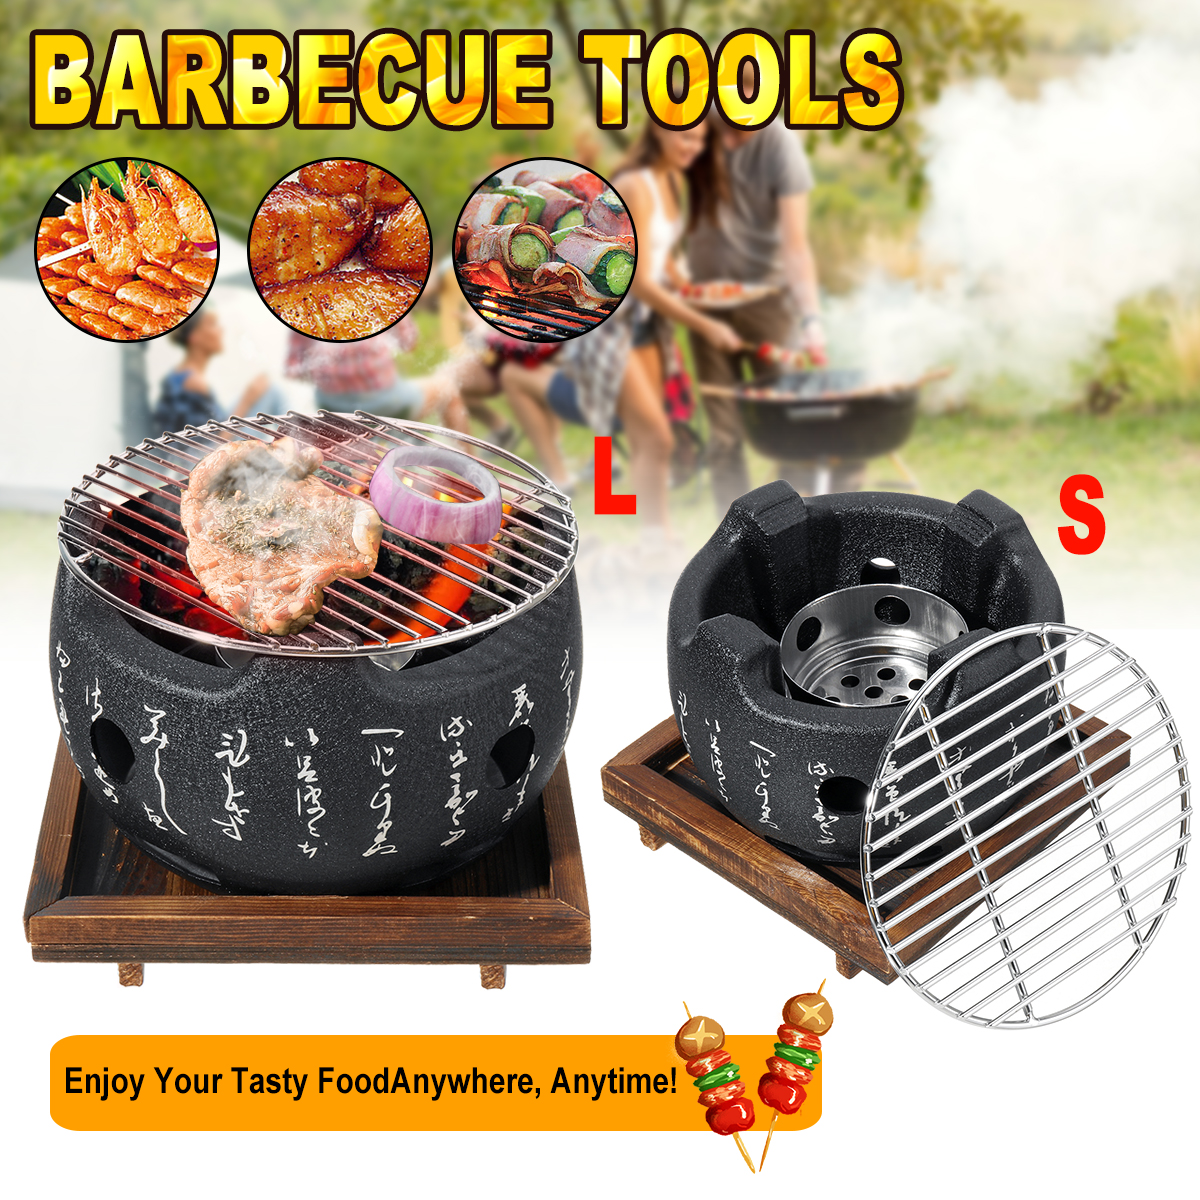 Japanese Style BBQ Grill Charcoal Grill Aluminium Alloy Portable Barbecue Tools - image 1 of 15